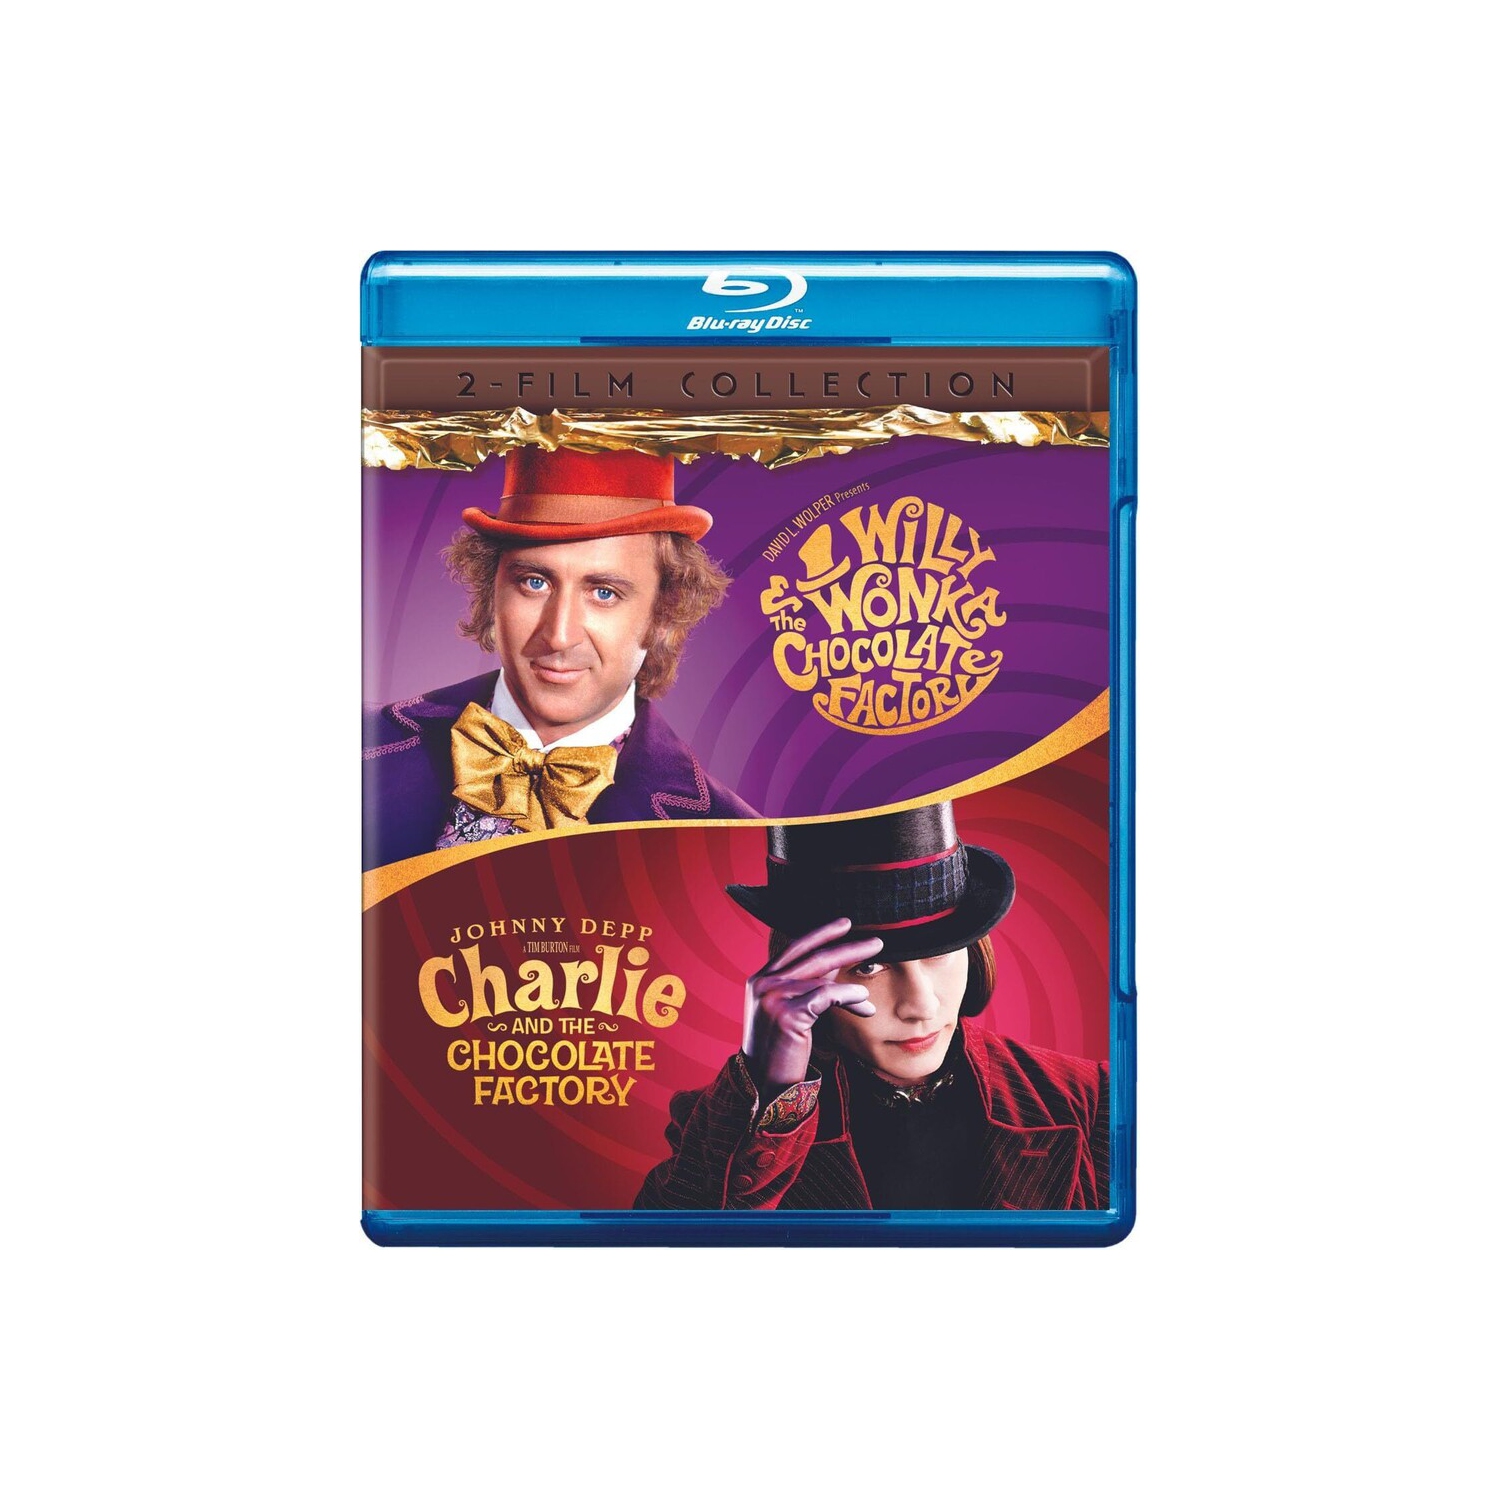 Willy Wonka & the Chocolate Factory / Charlie and the Chocolate Factory 2-Film Collection [BLU-RAY] 2 Pack, Eco Amaray Case